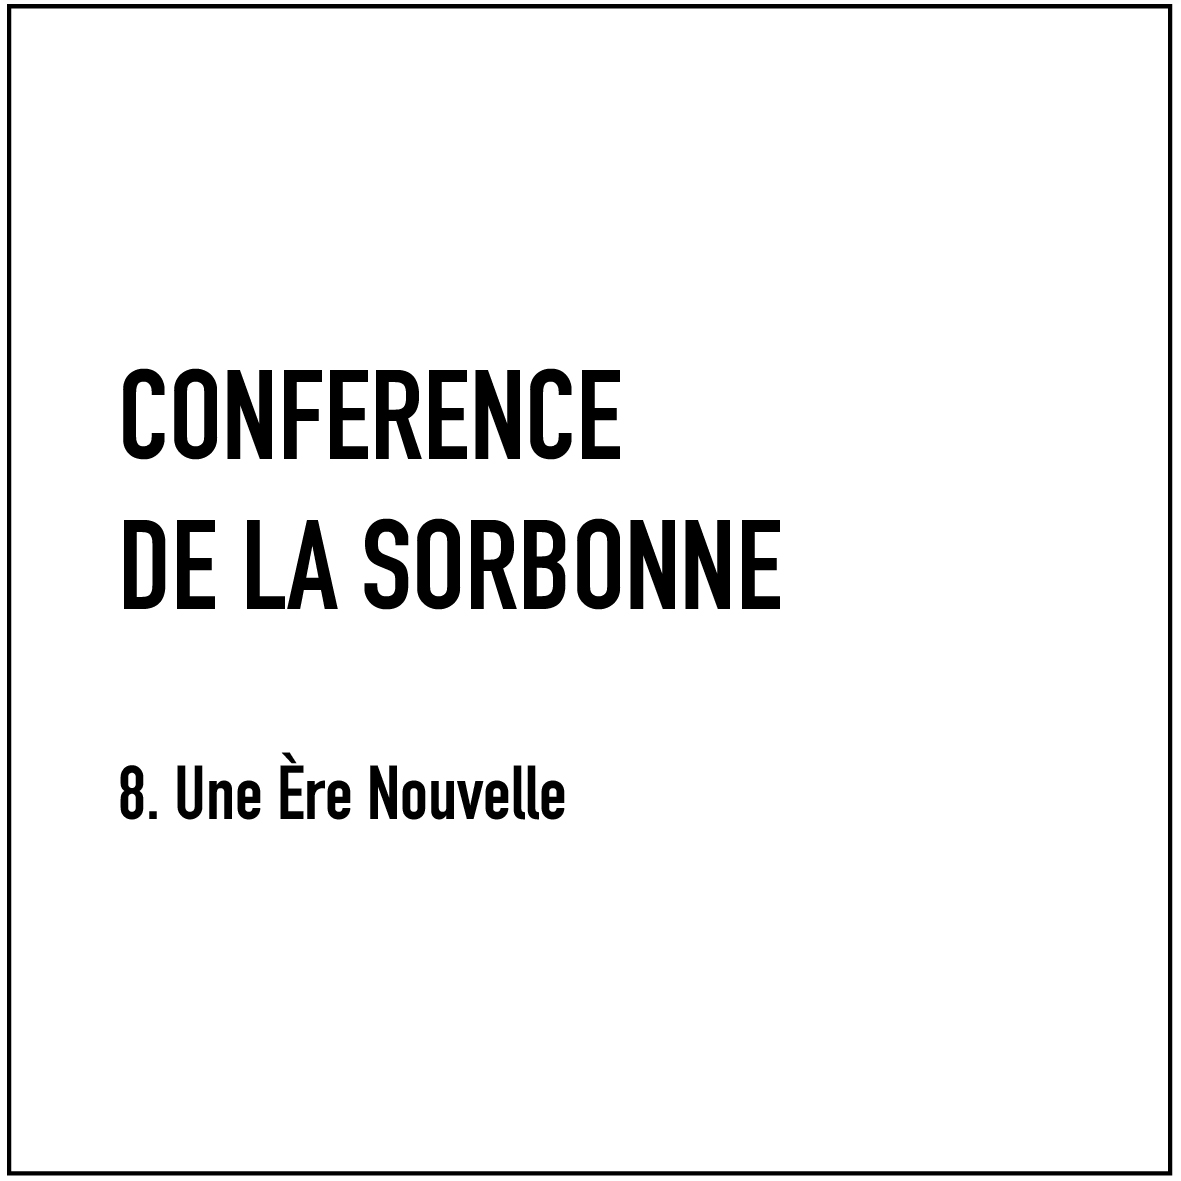 Lecture at the Sorbonne - 8. A New Era